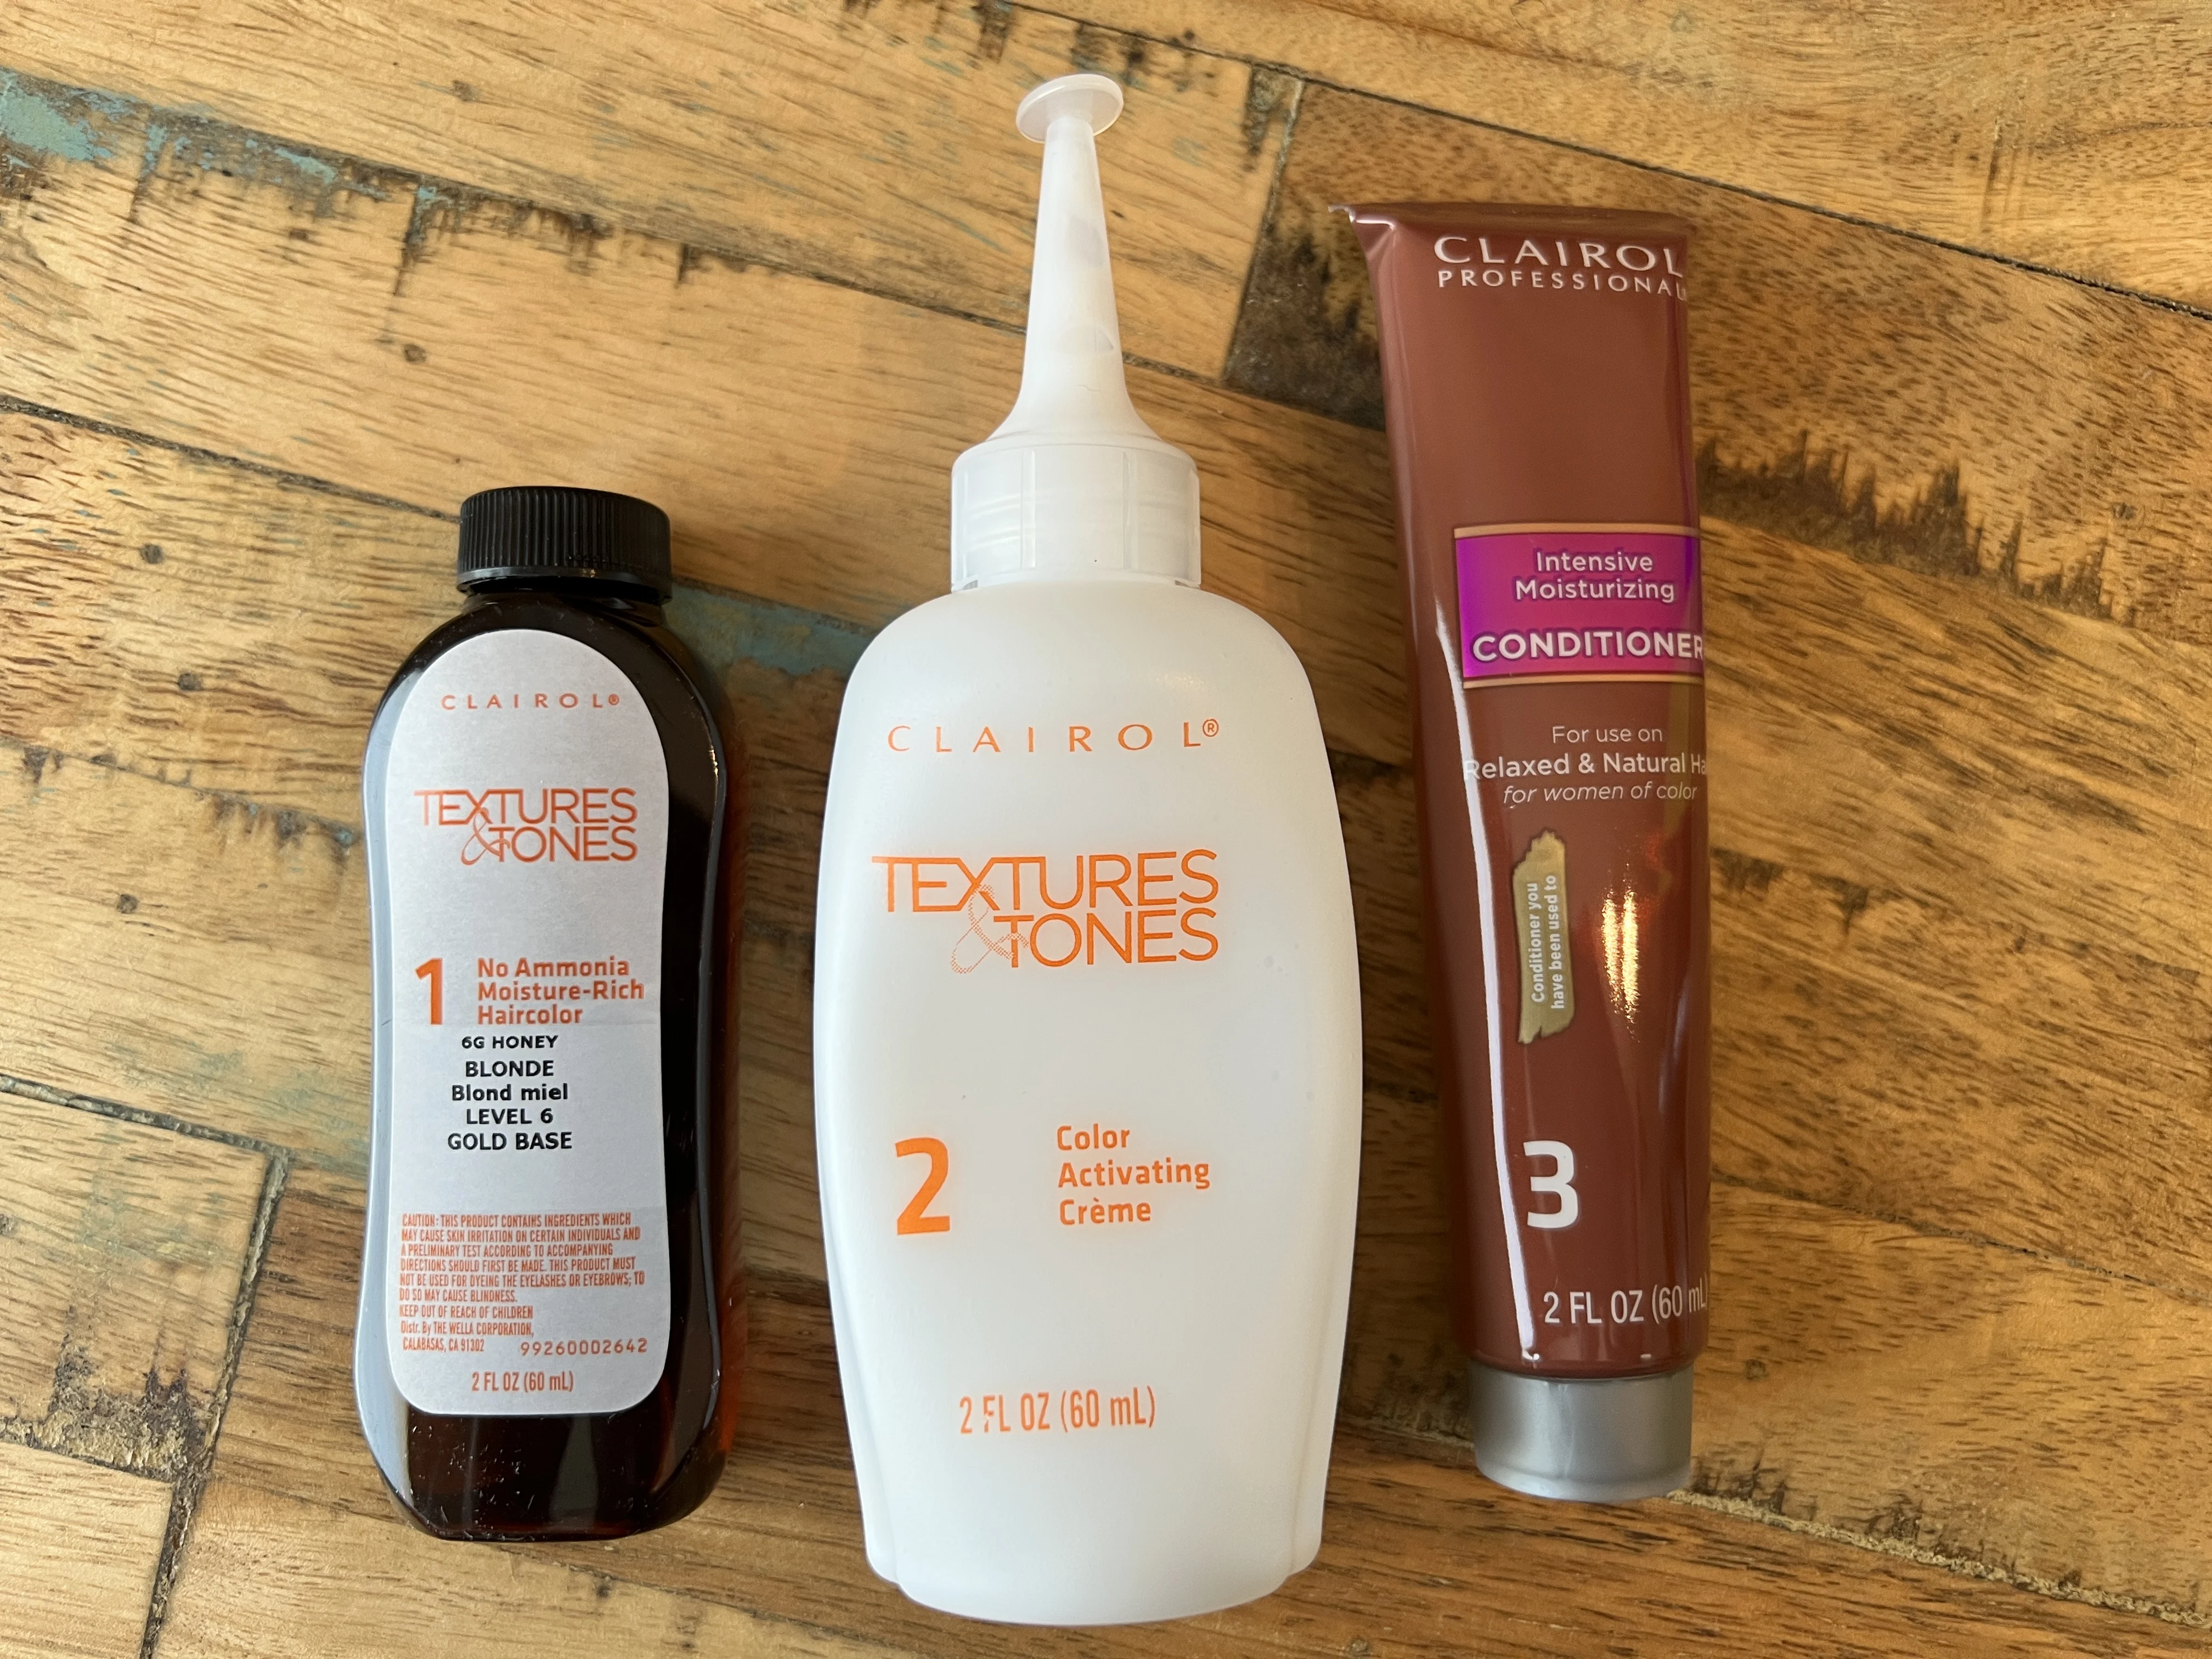 The three-step process for Clairol's Textures & Tones includes 1) using no-ammonia moisture-rich hair color, 2) a color-activating creme, and 3) intense moisturizing conditioner.